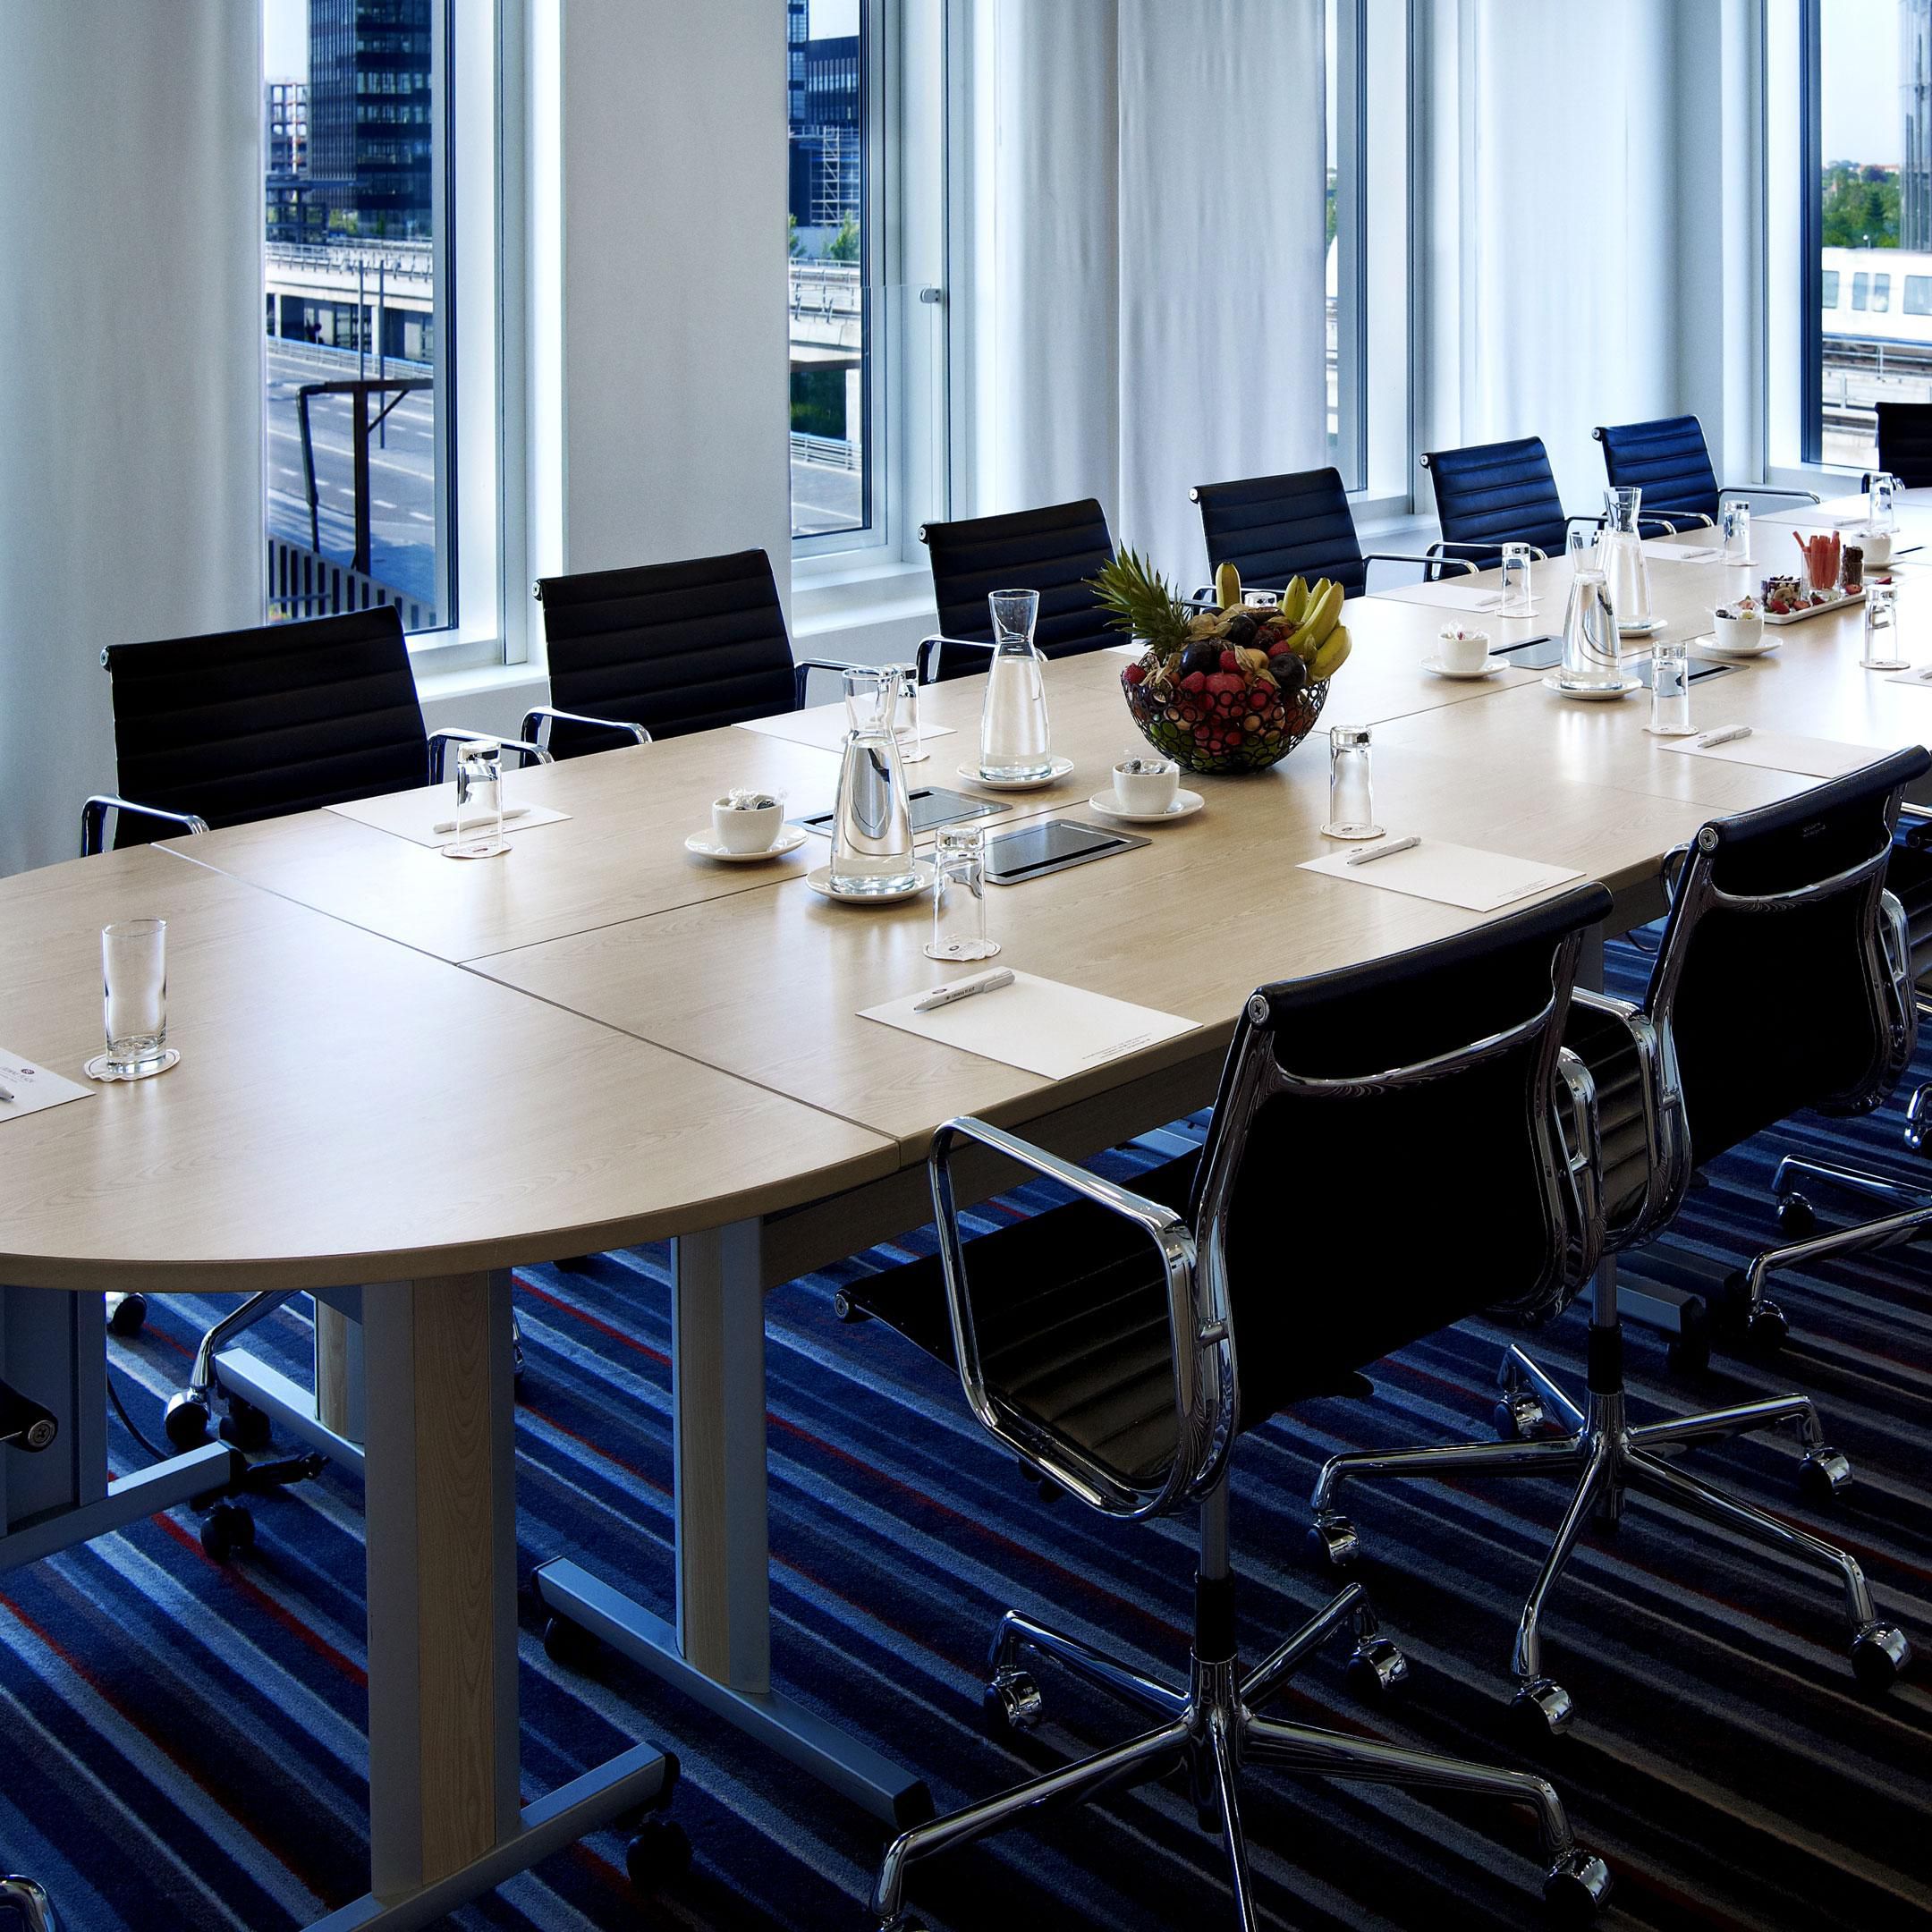 Meeting rooms and group rooms with space for 5-90 participants